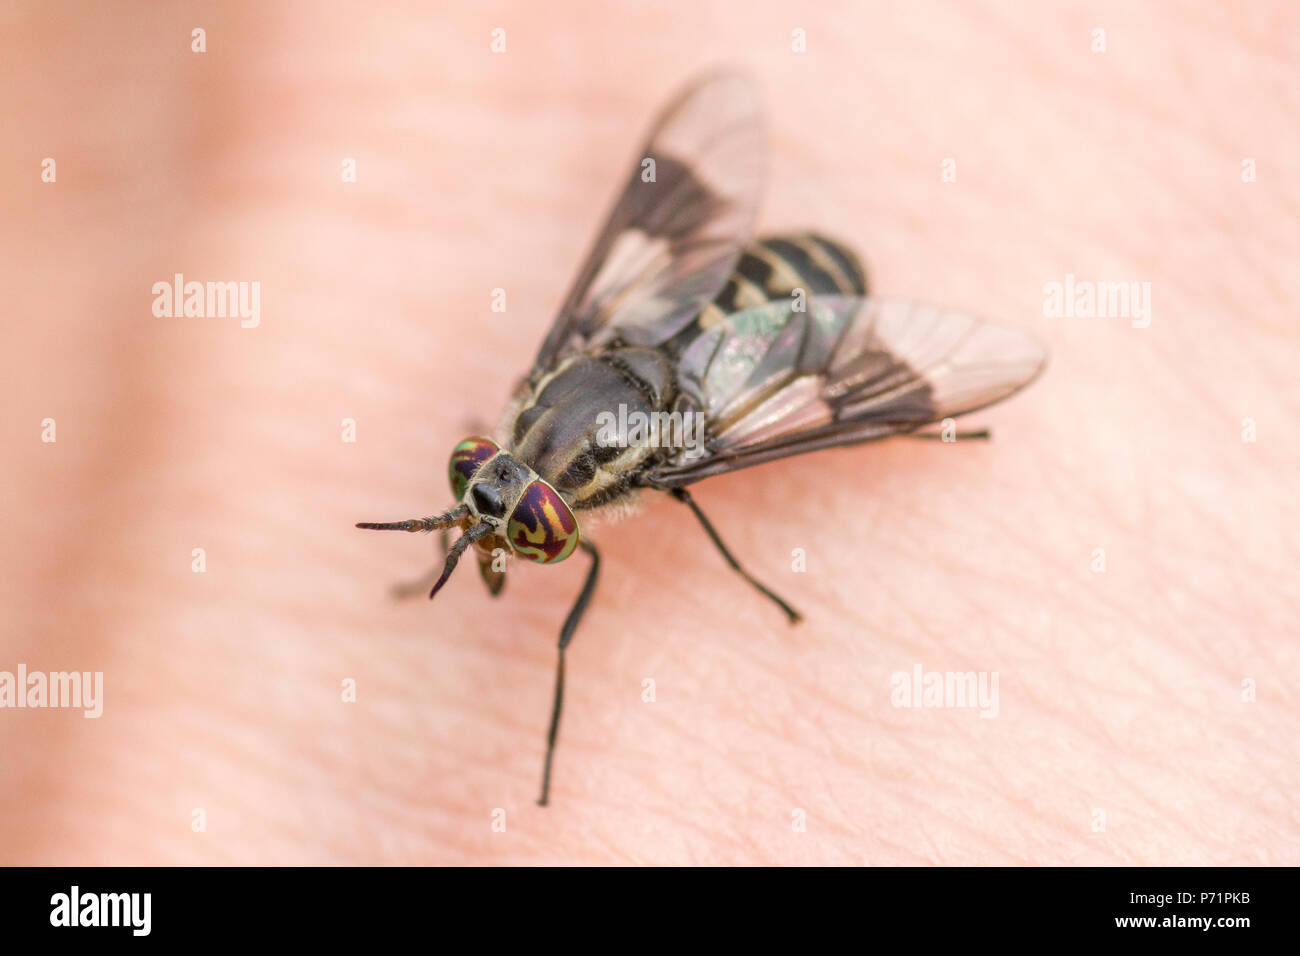 A deer fly (Chrysops sp.) about to bite a human hand. Stock Photo